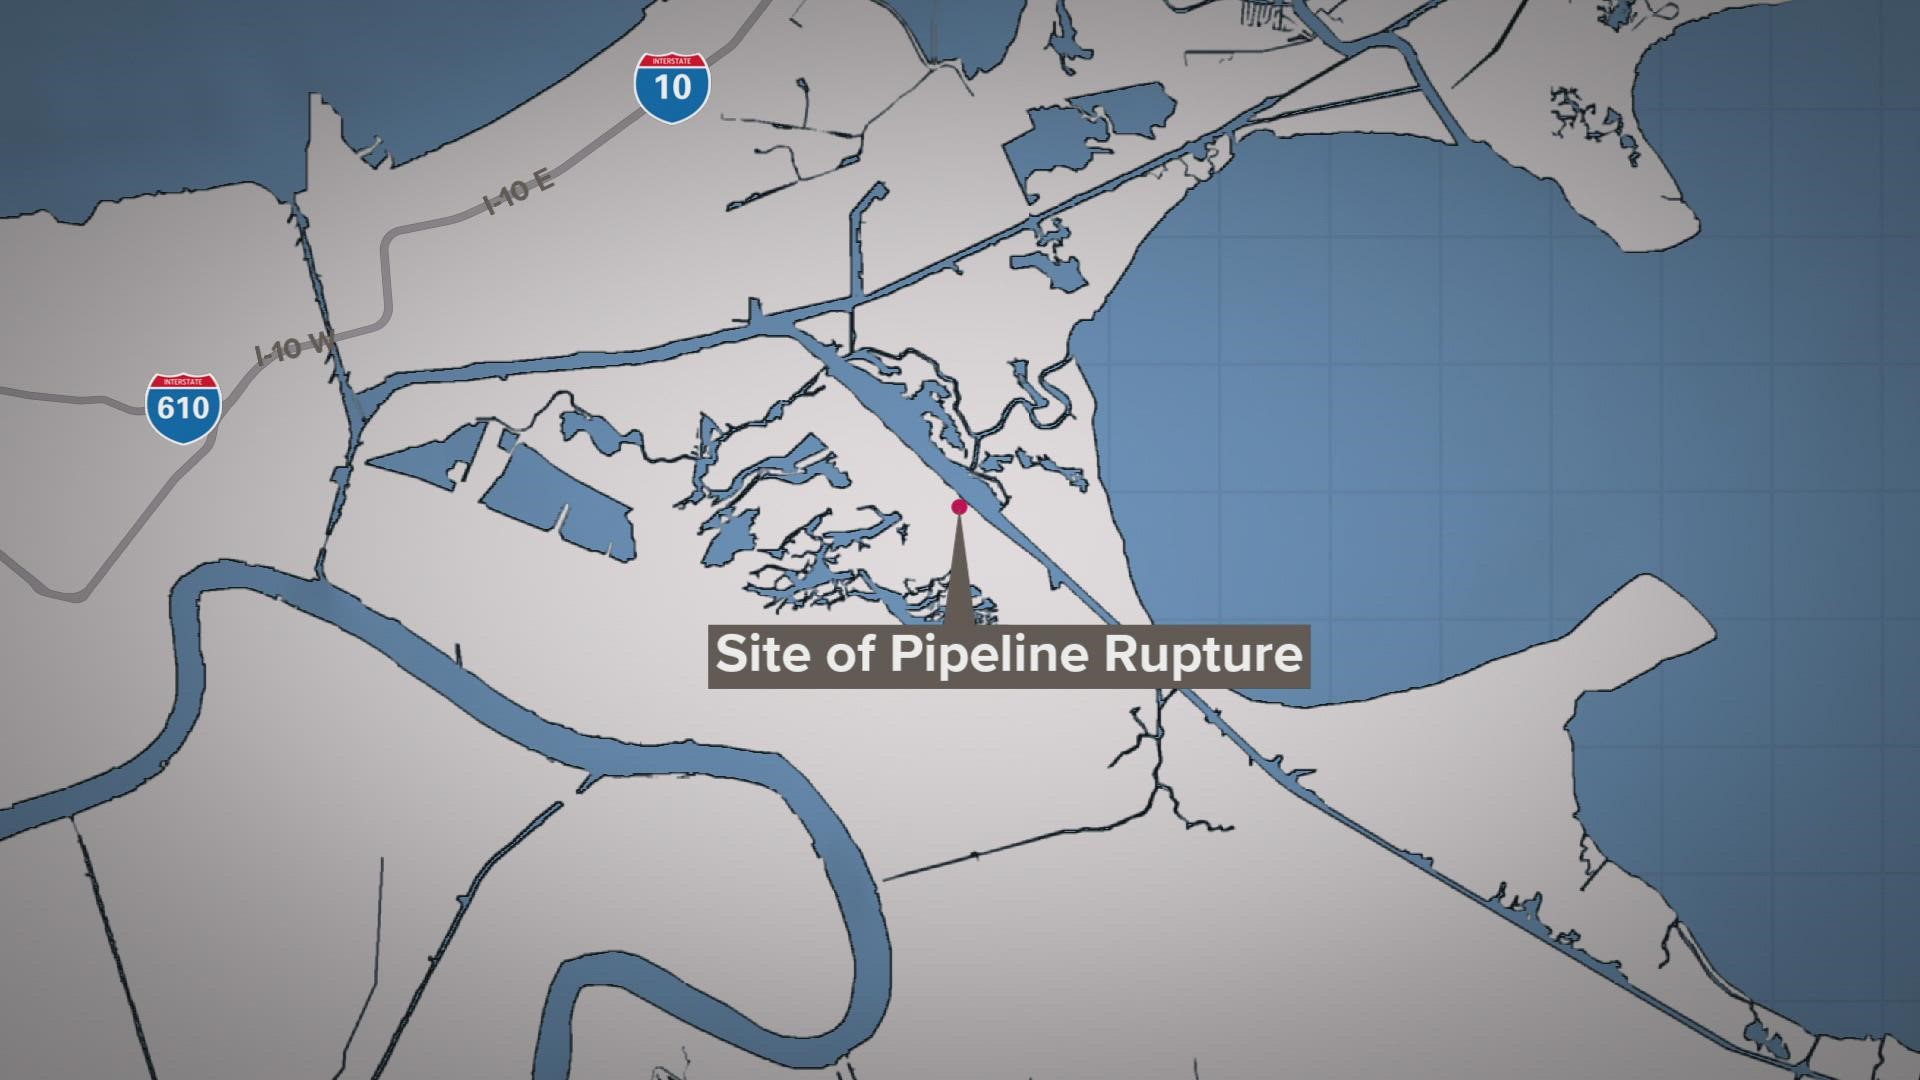 300,000 gallons of diesel spilled near New Orleans after an inspection discovered corrosion on the pipeline.